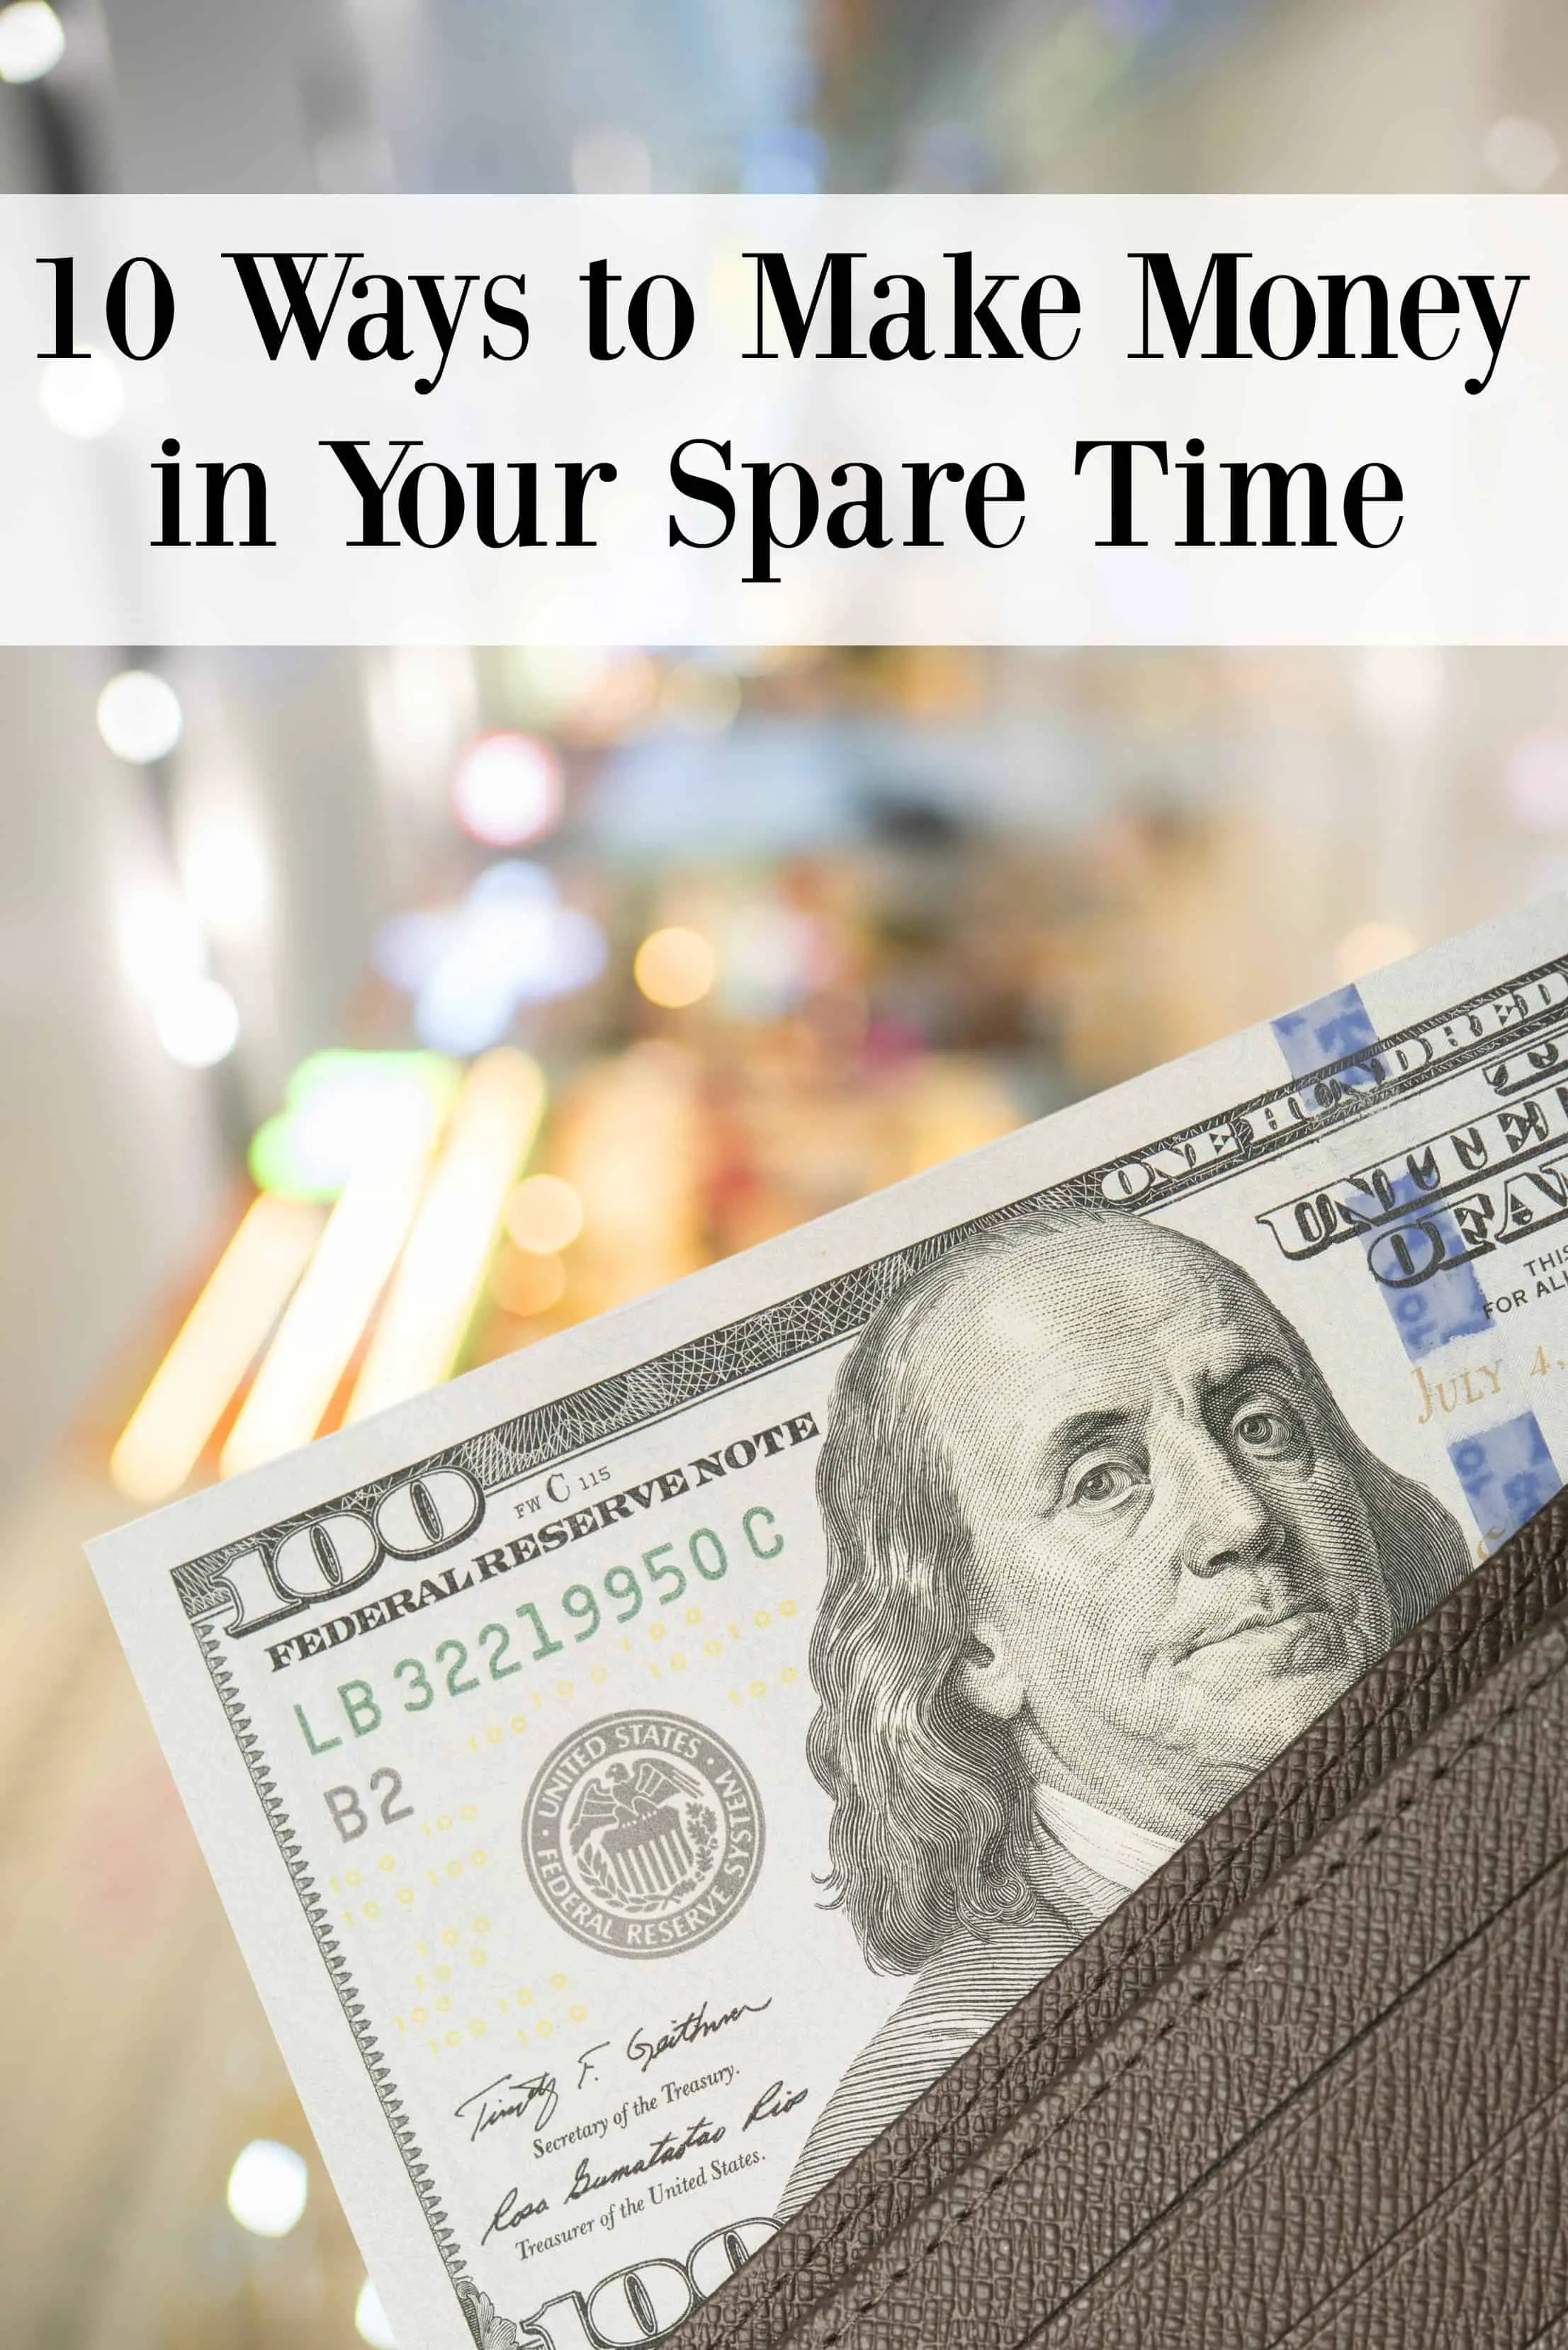 10 Ways to Make Money in Your Spare Time